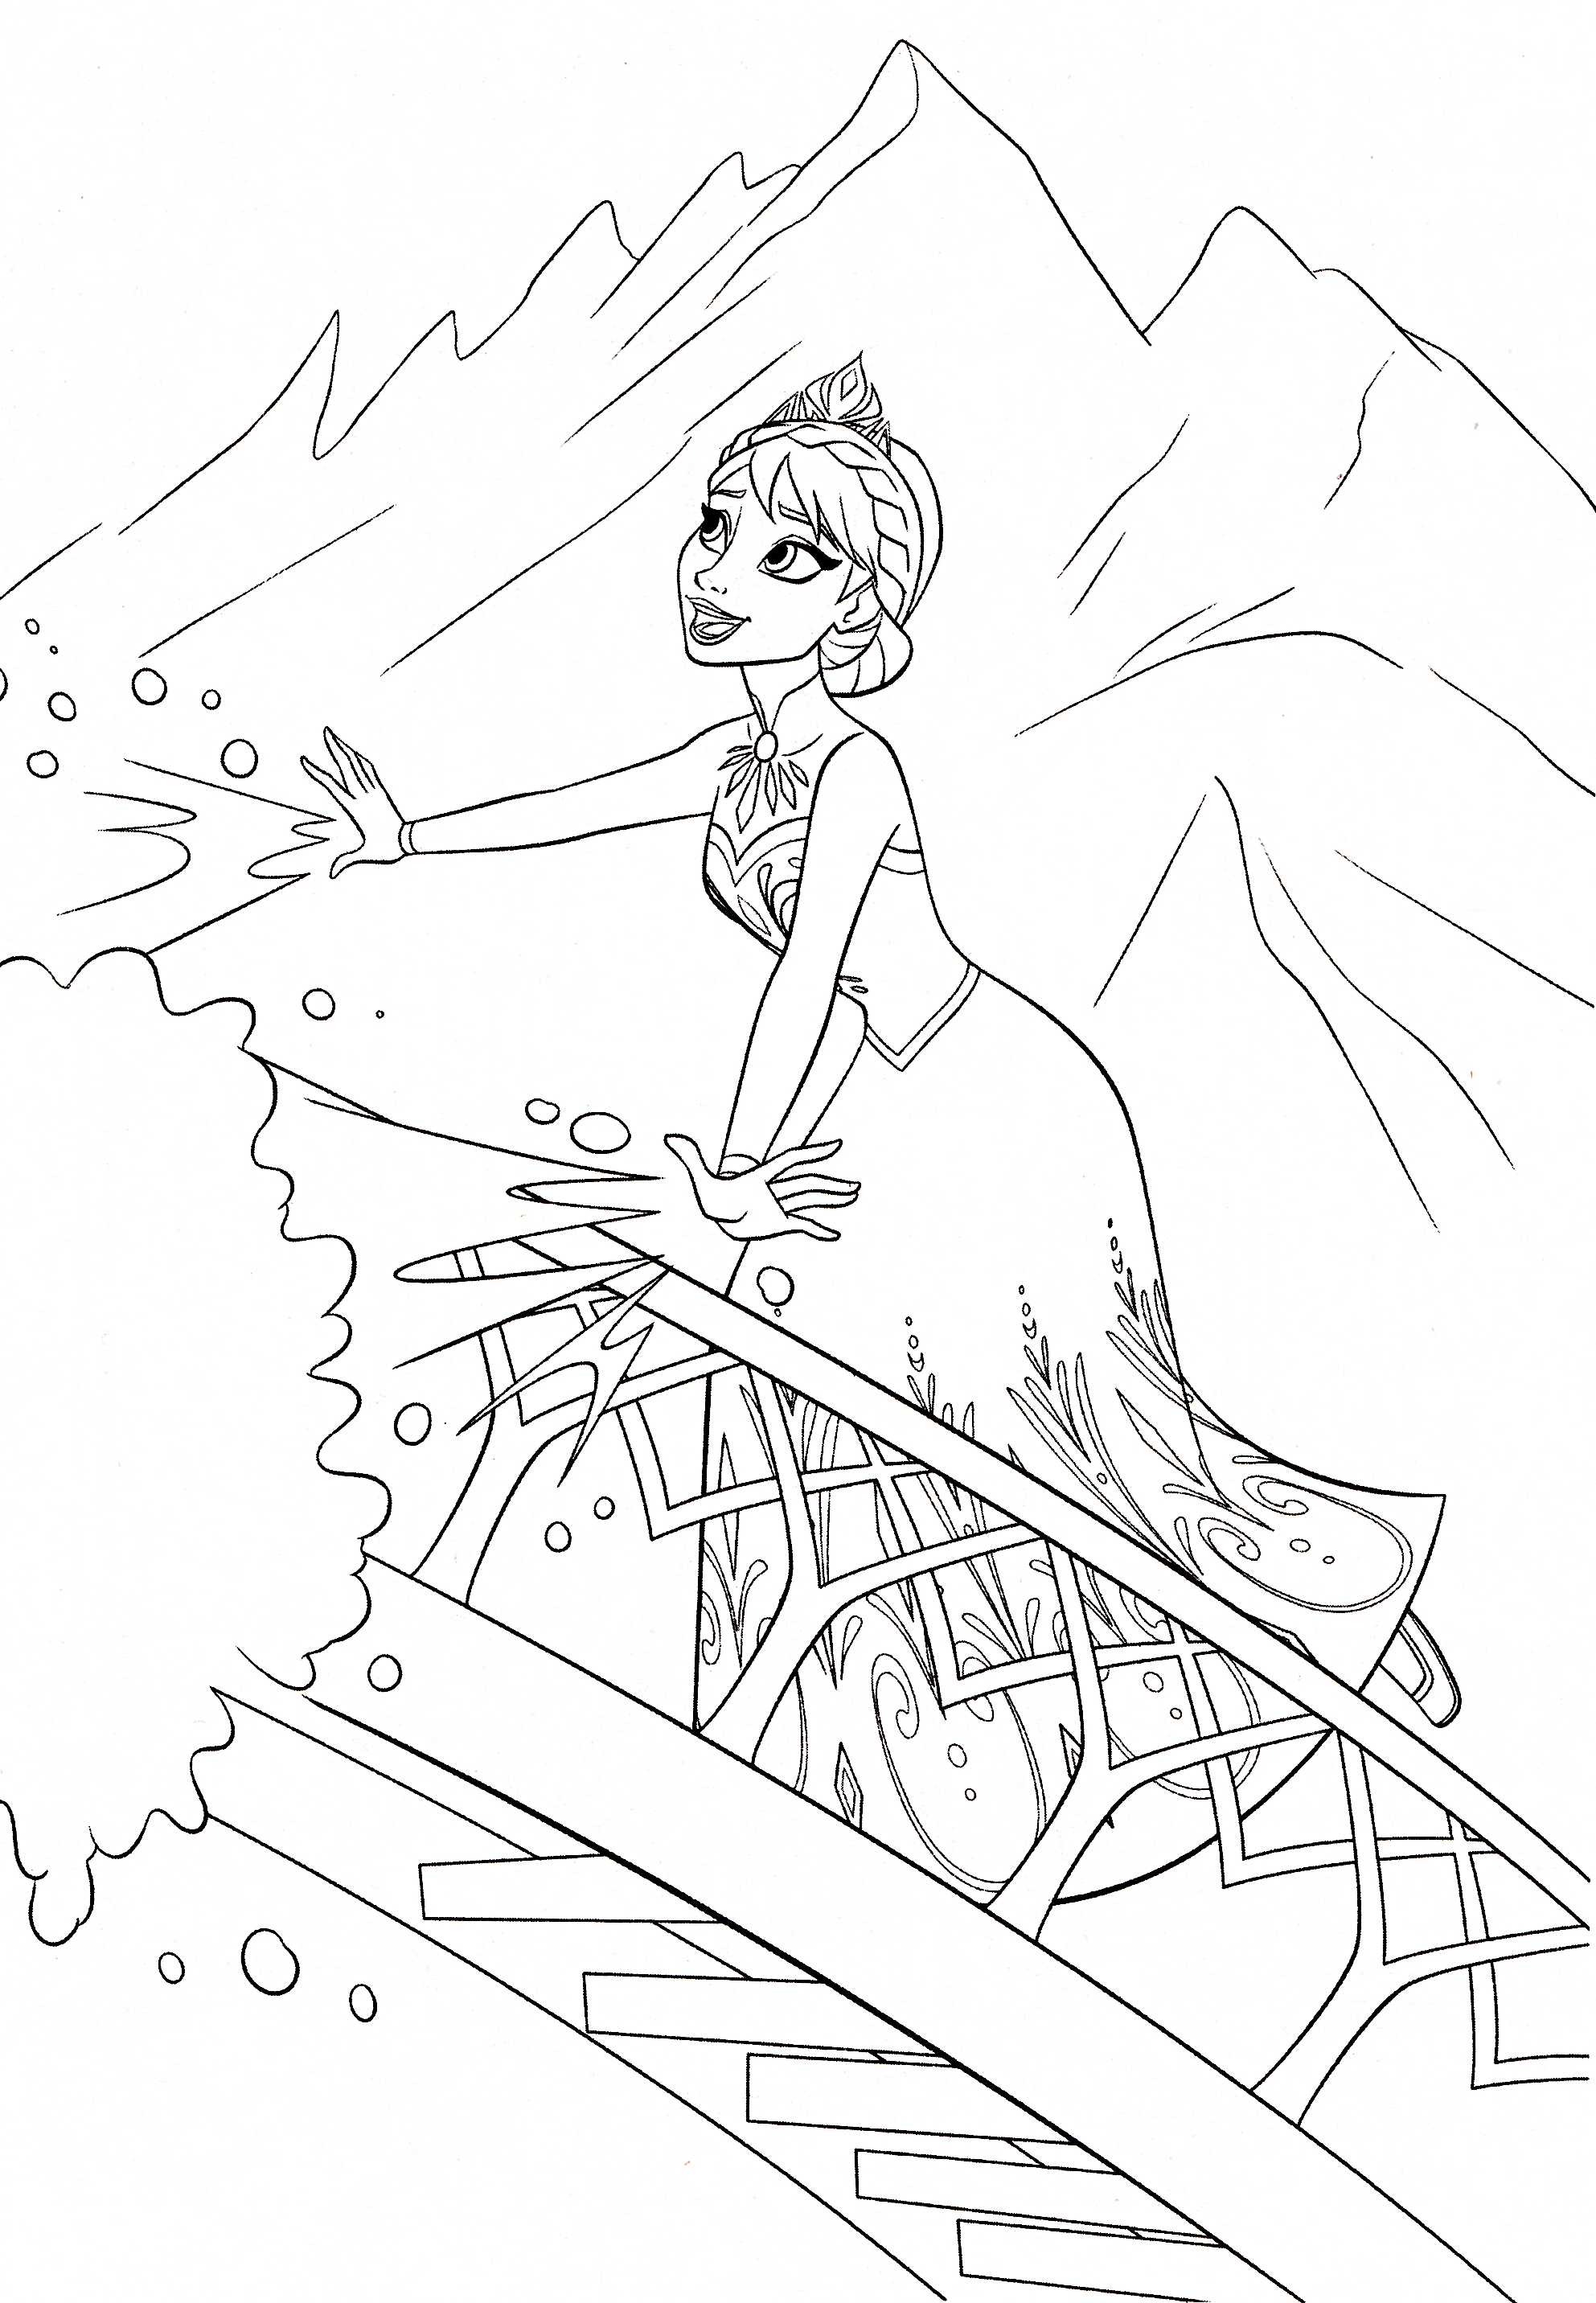  Frozen Coloring Pages | Color pages | FREE coloring pages for kids |Printable coloring pages for kids| #26